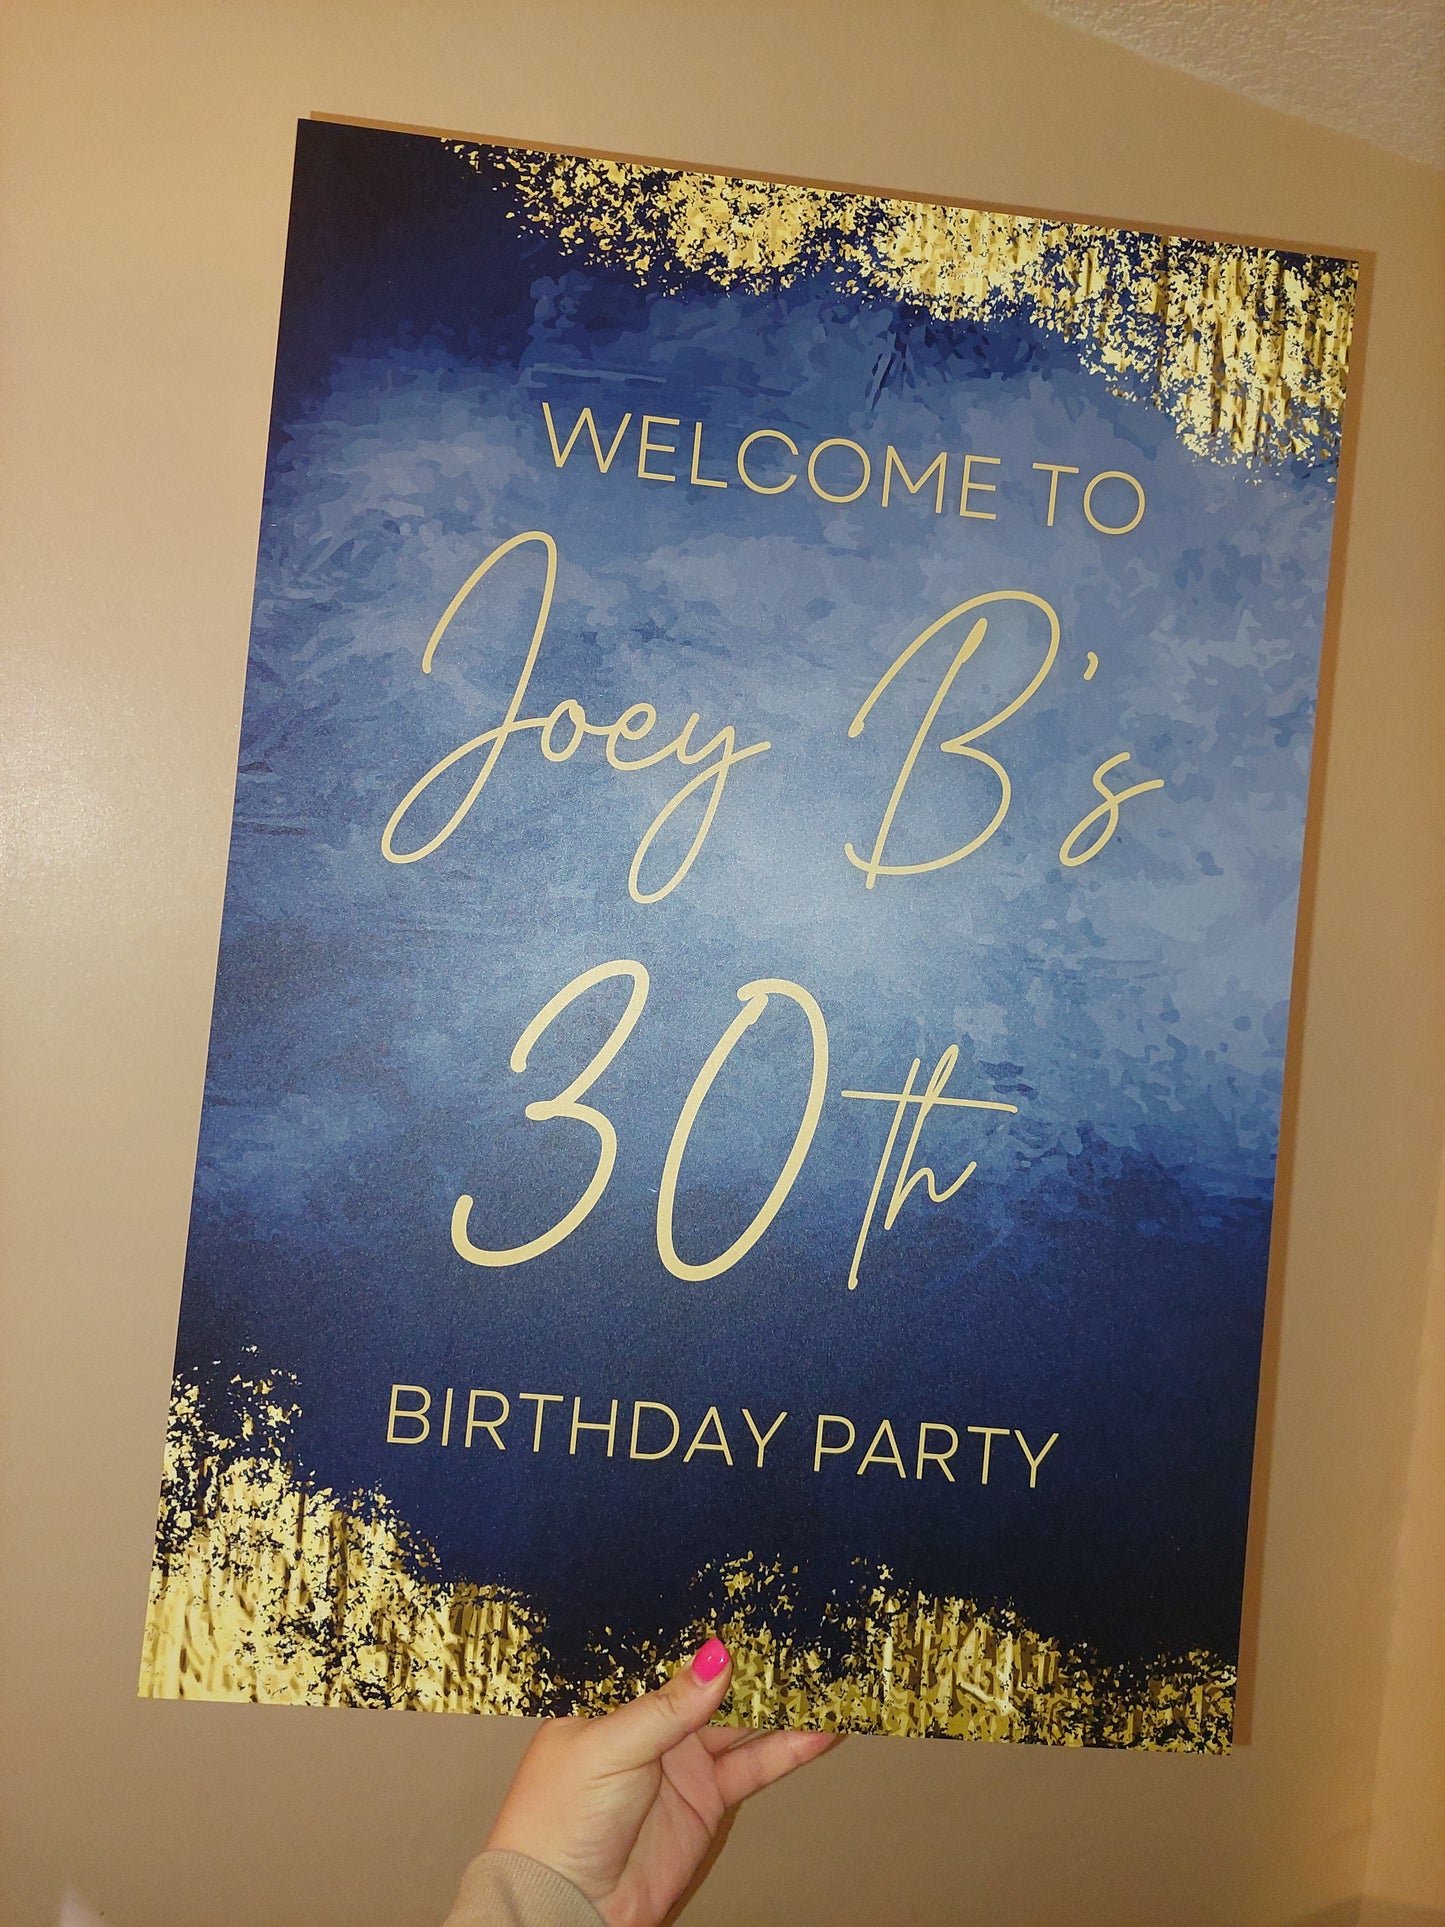 Navy Blue & Gold Welcome Board Sign | Personalised Birthday Board | Birthday Party Sign | A4, A3, A2